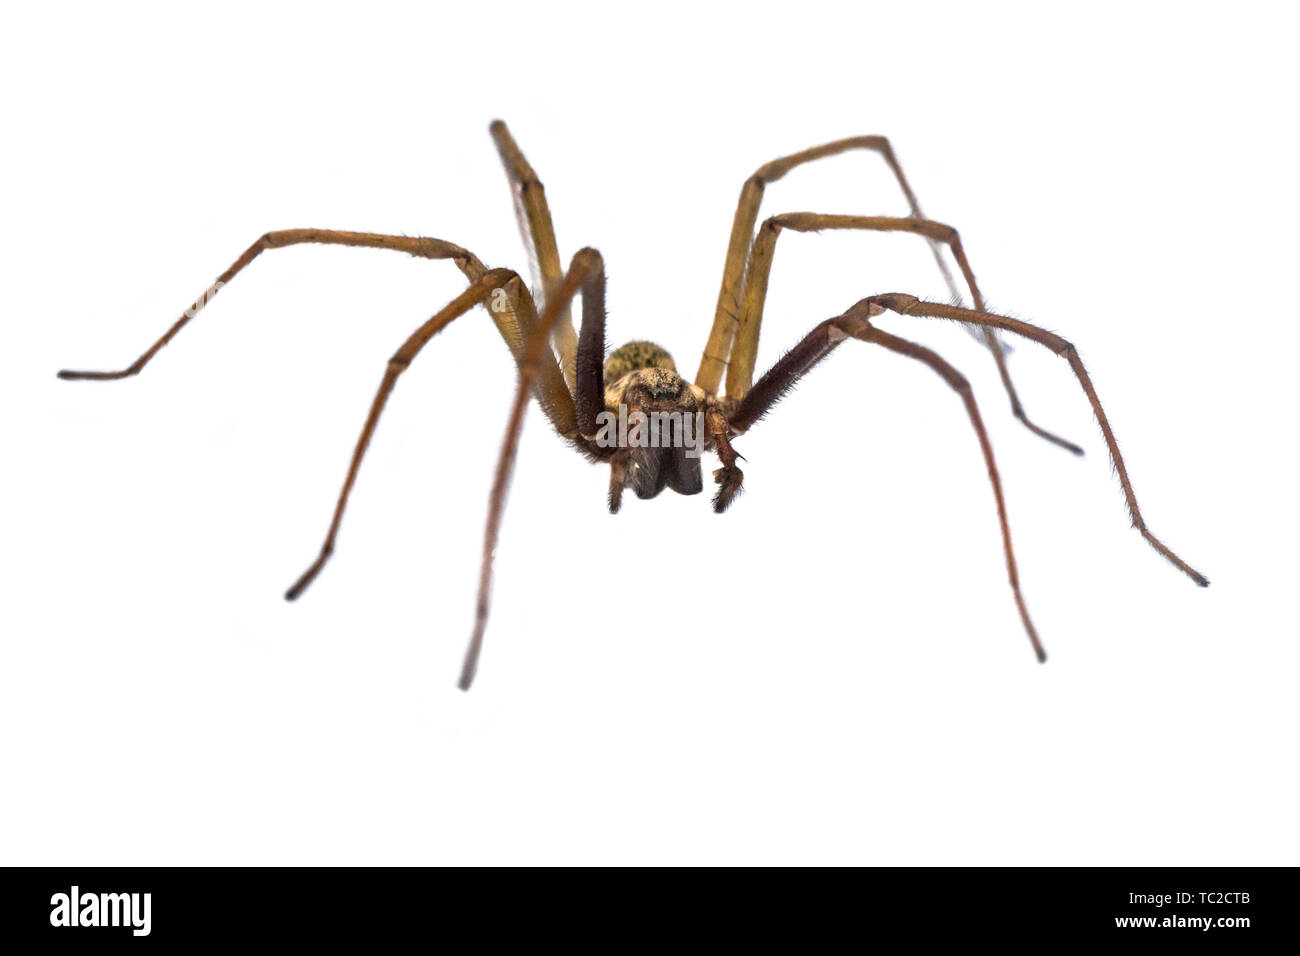 Giant house spider (Eratigena atrica) frontal view of arachnid with long hairy legs isolated on white background Stock Photo